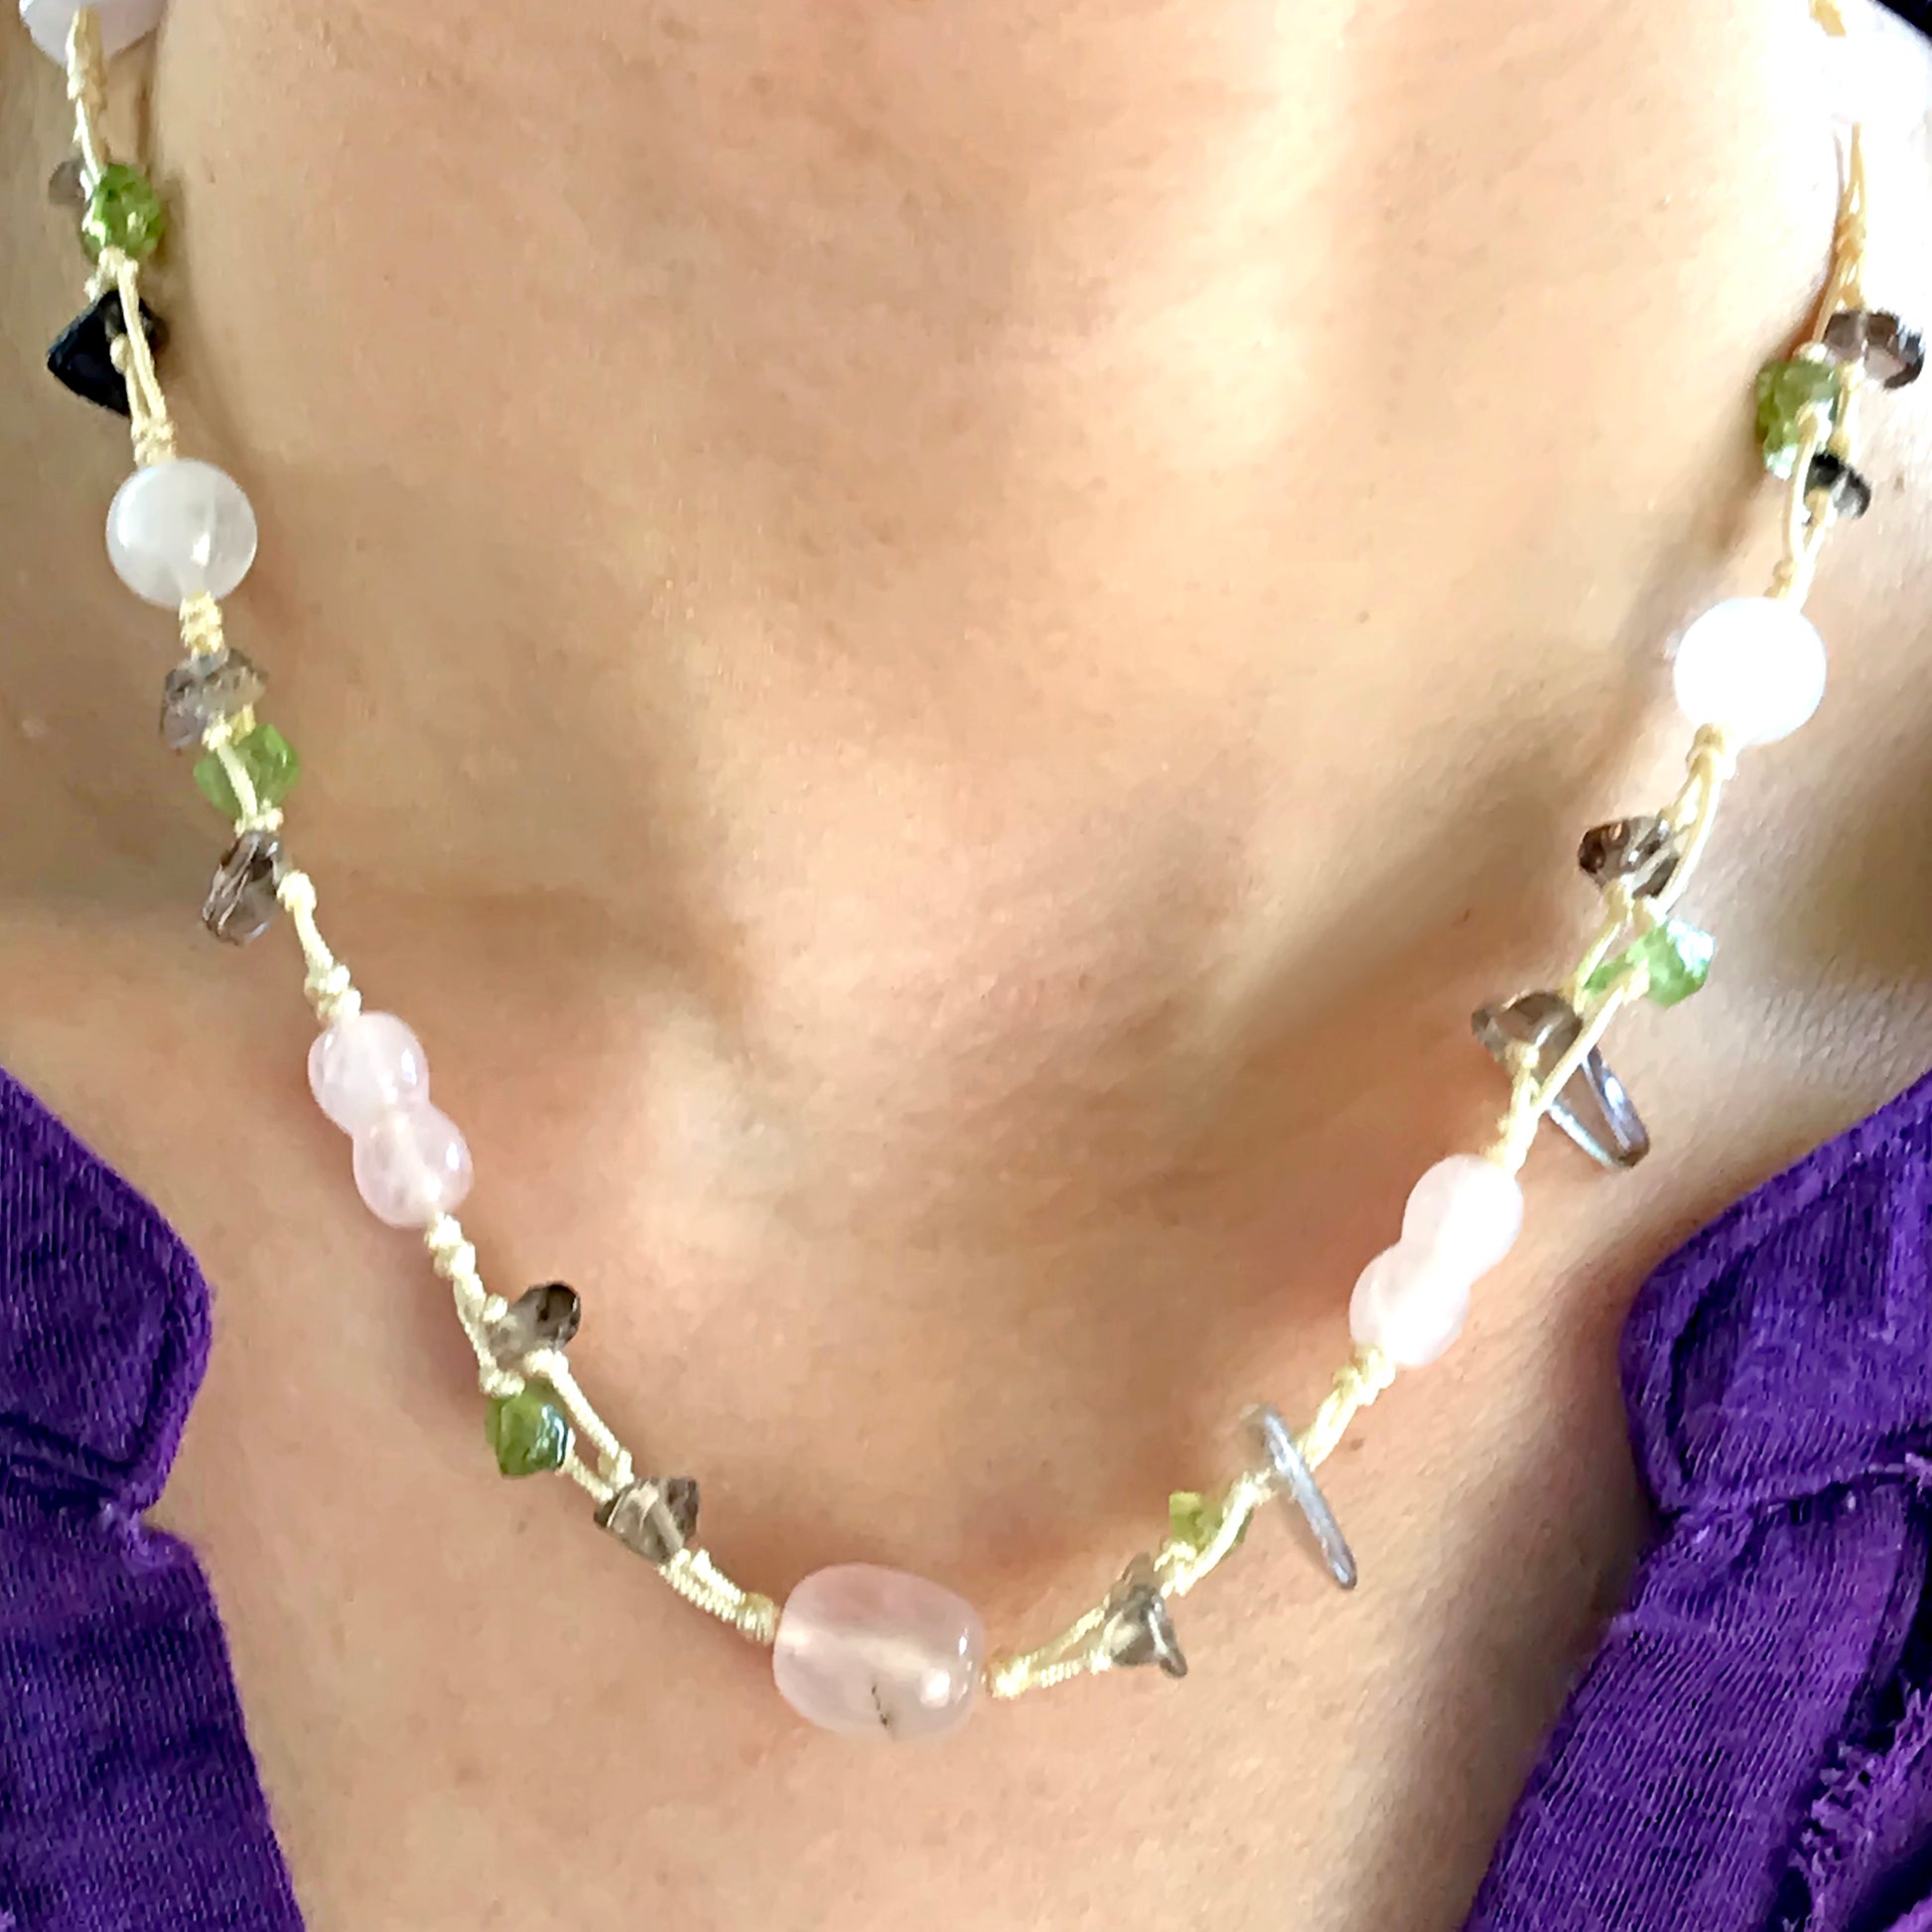 Enhance Your Look with Oval Beads Rose Quartz Gemstones Necklace